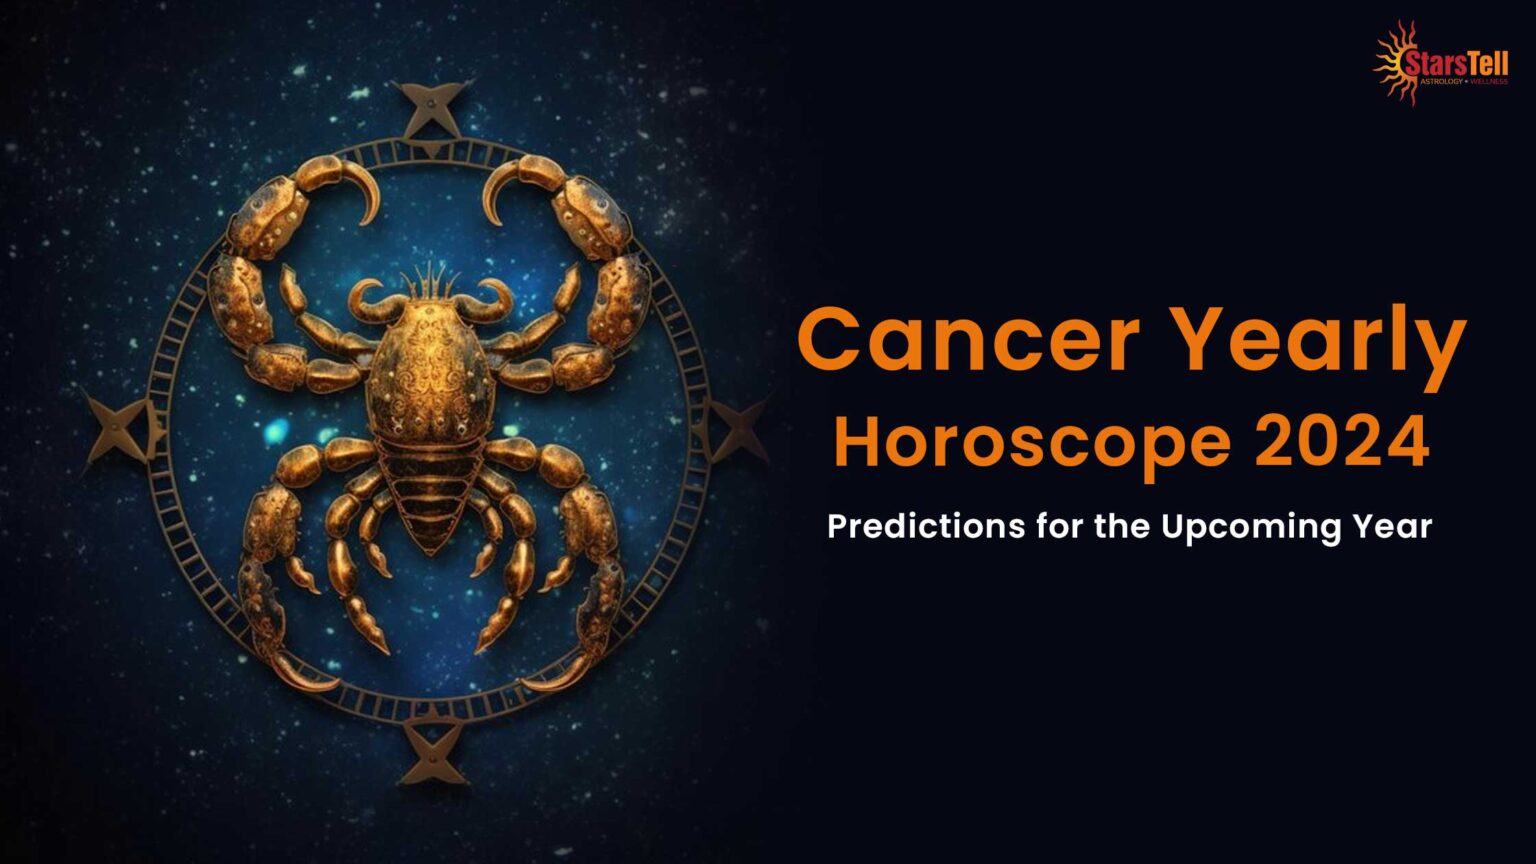 Cancer Yearly Horoscope 2024 Predictions for the Year